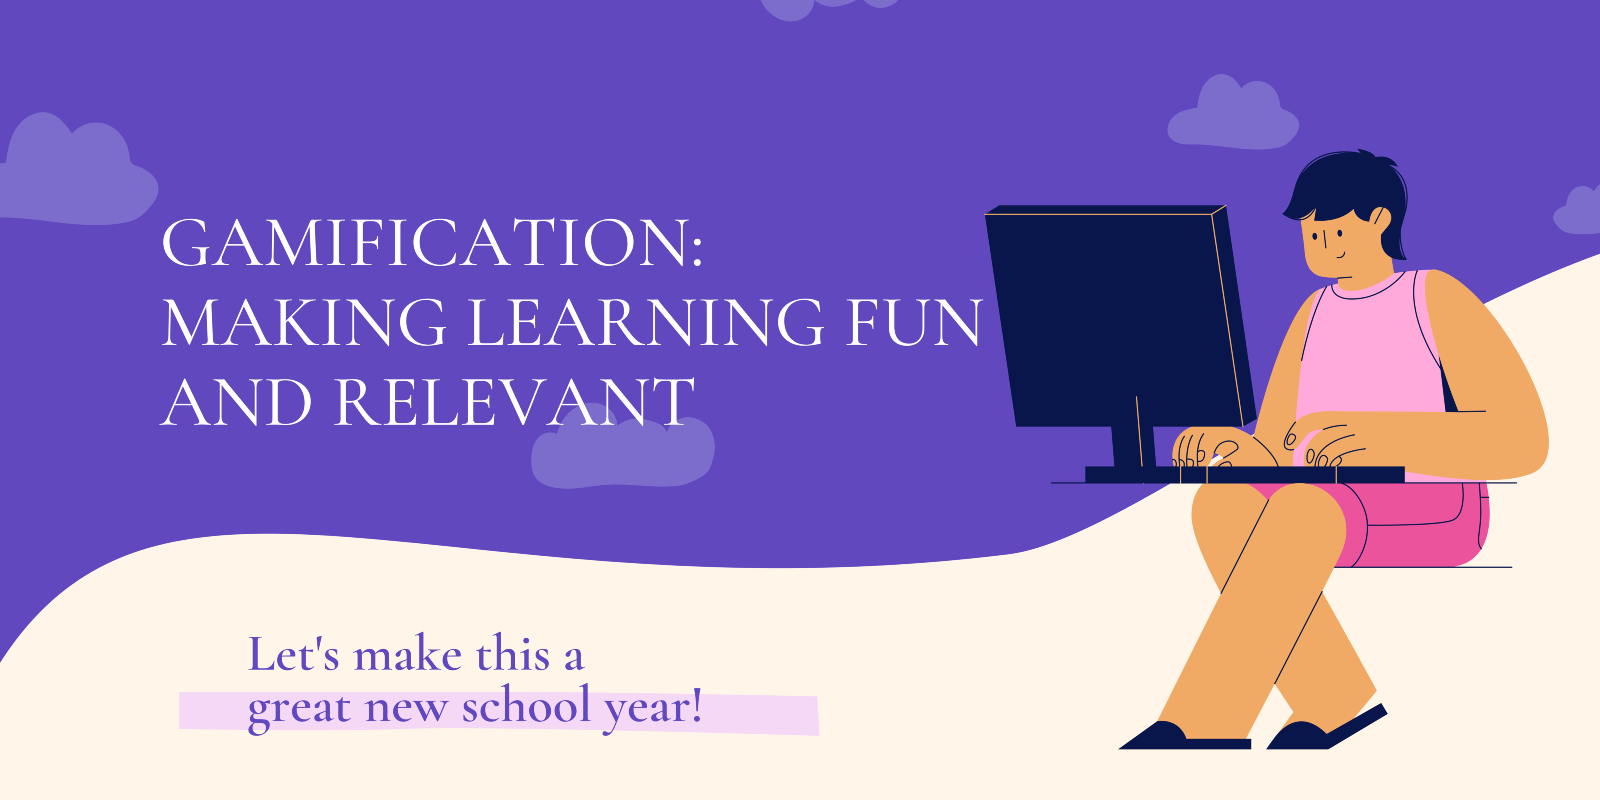 Scope of gamification in keeping learning fun and relevant